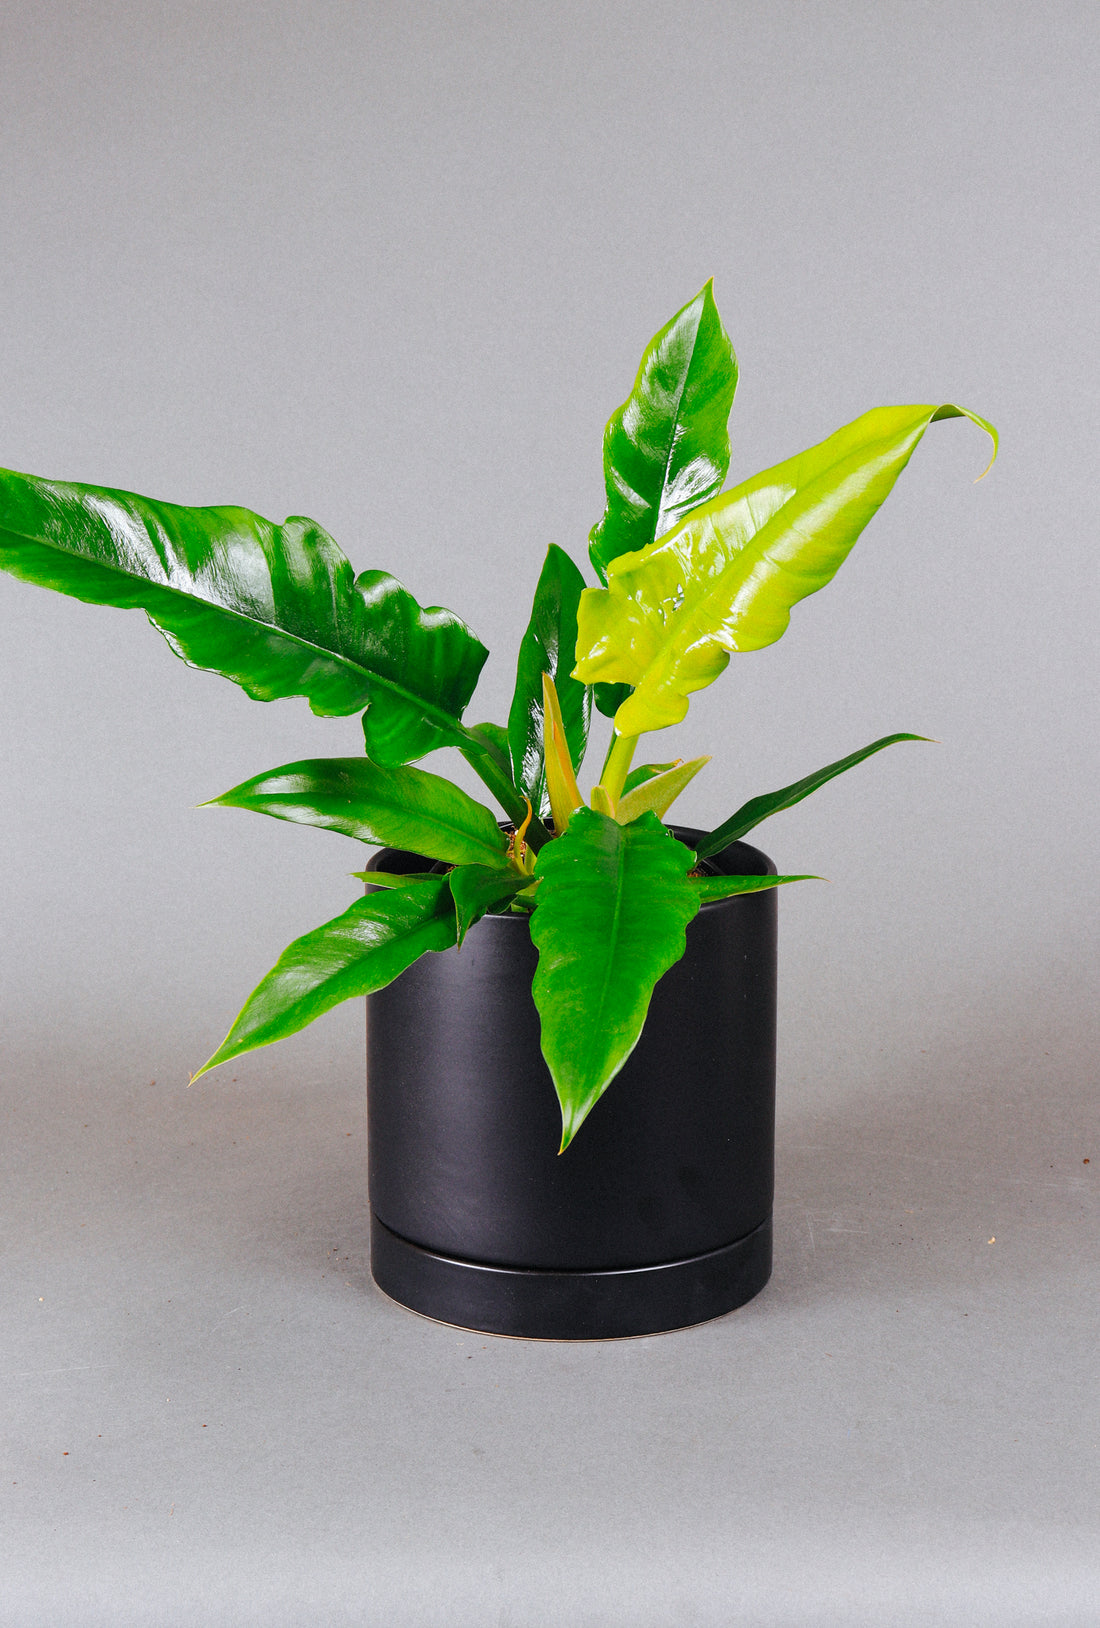 How to Care For The Philodendron Jungle Boogie